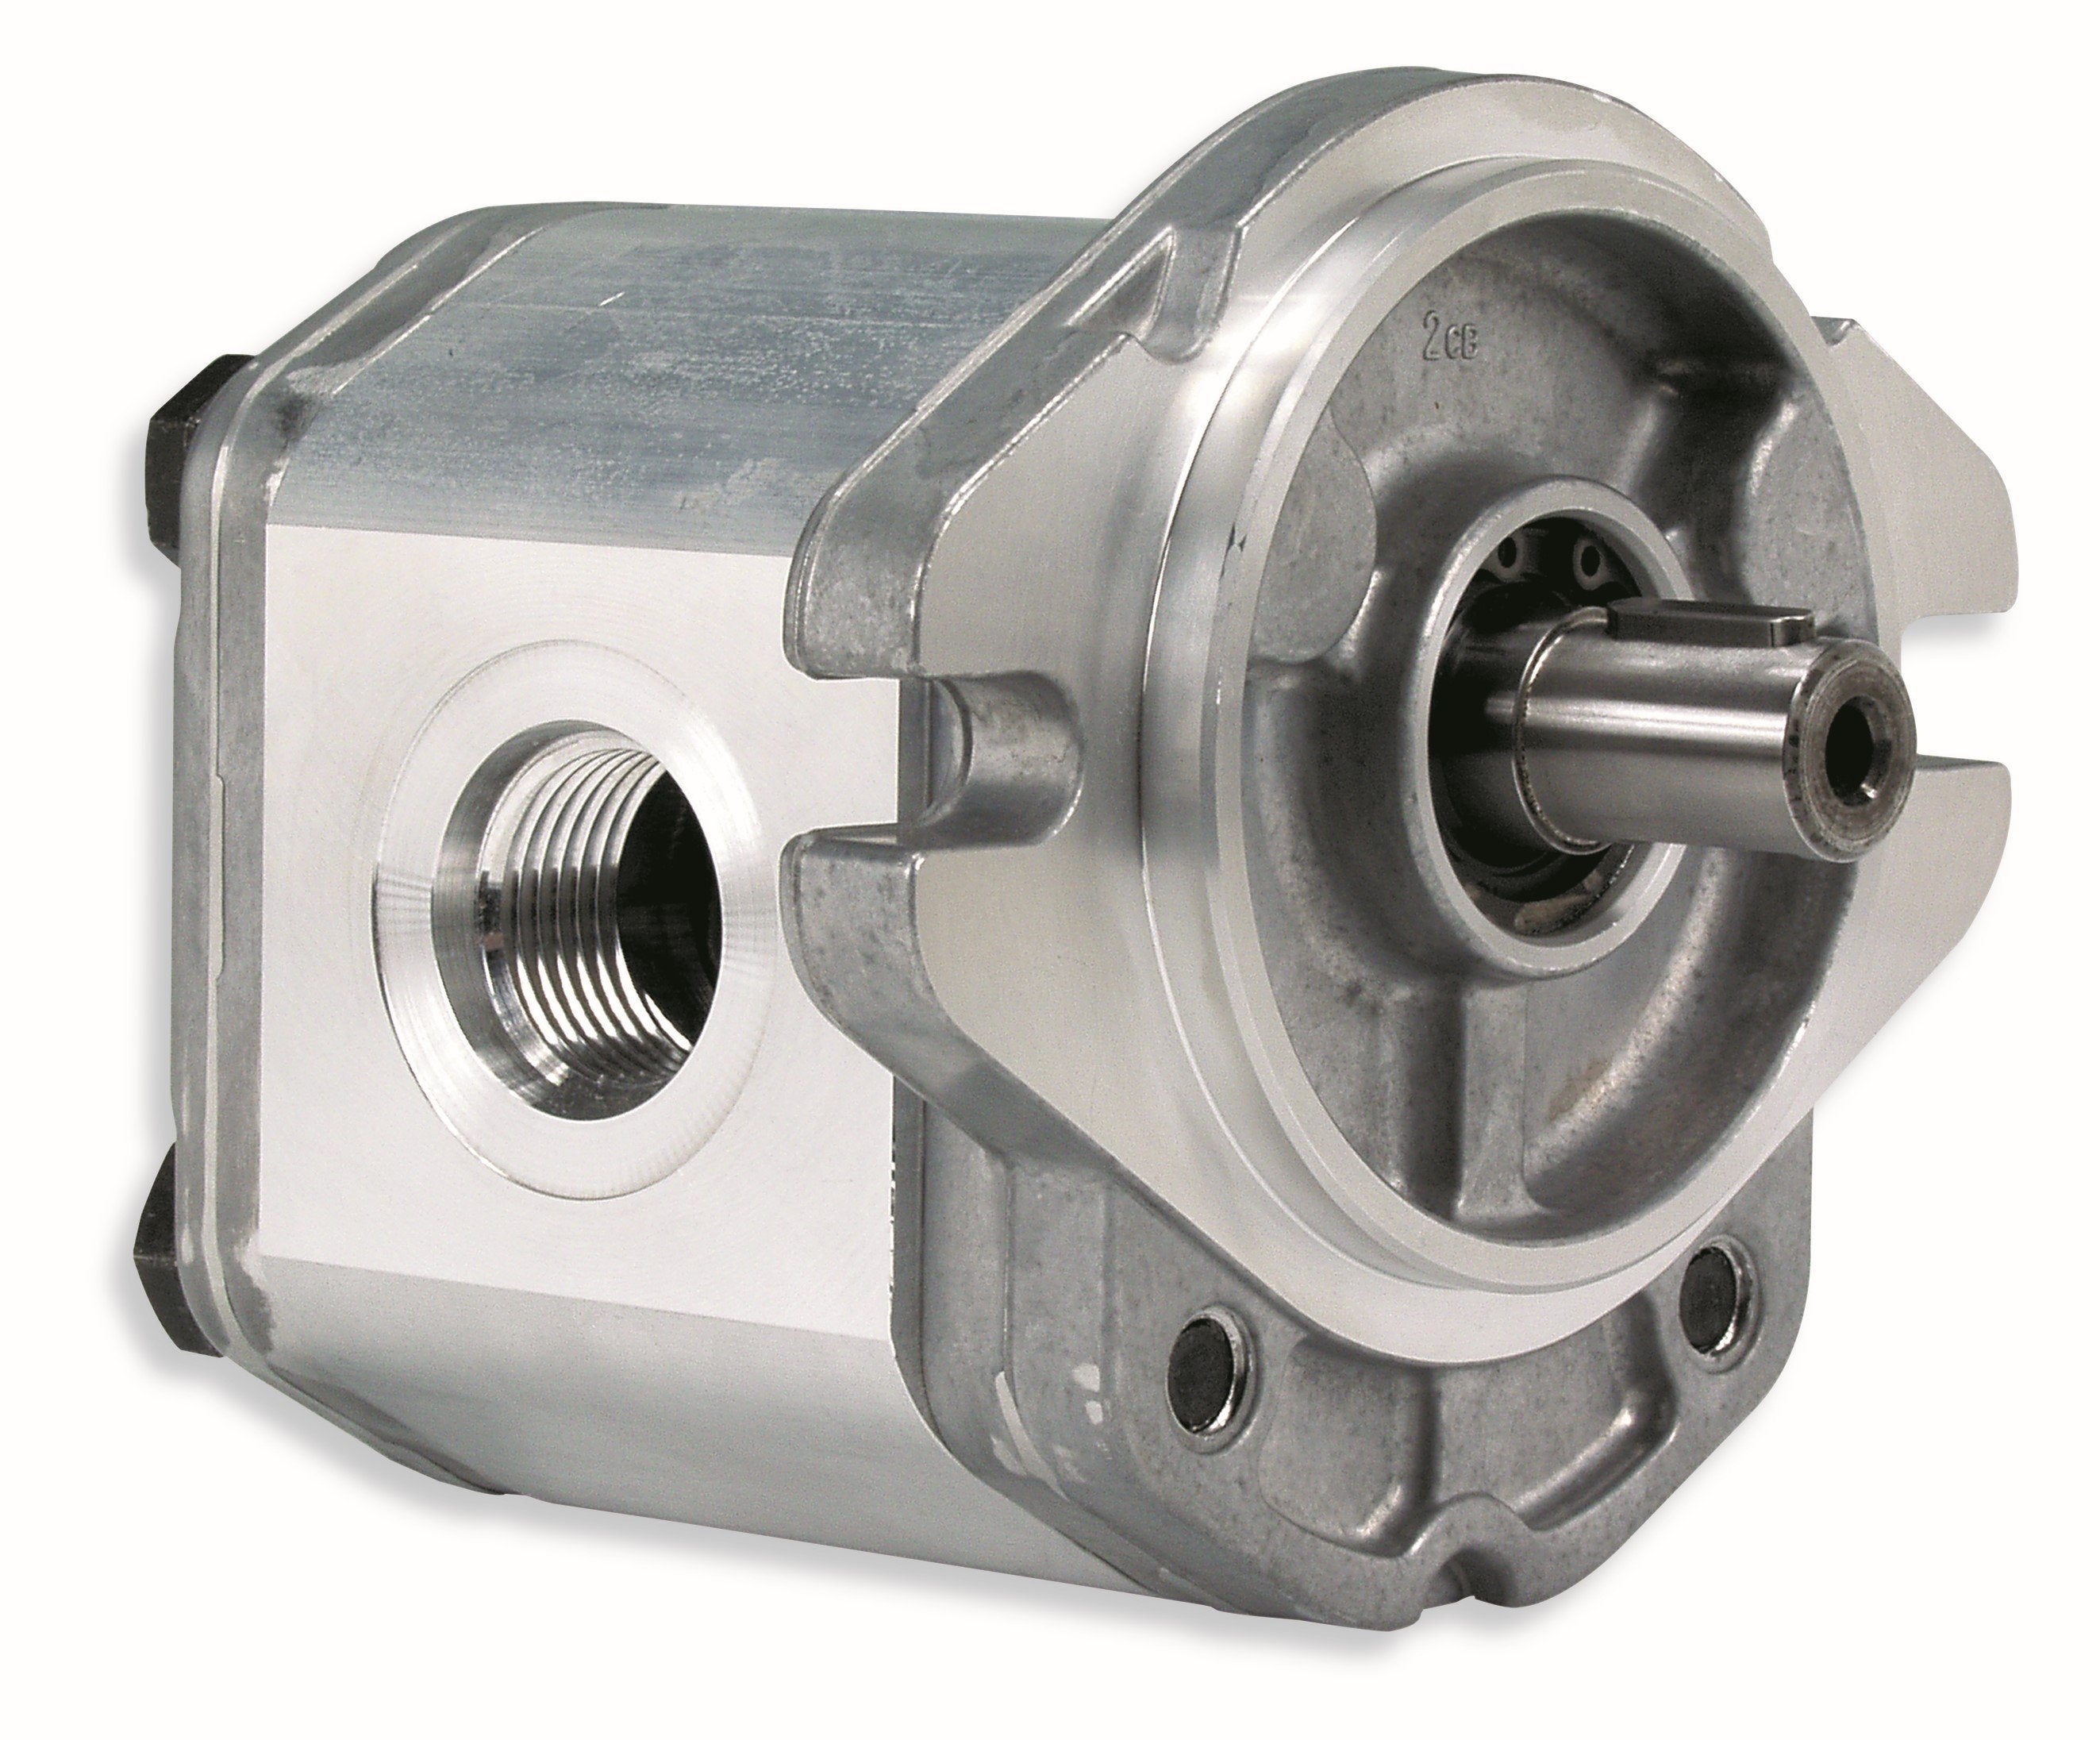 GHM2A-R-22-S1-E2 : Marzocchi Gear Motor, Bidirectional, 16cc, 3770psi rated, 2800RPM, 0.75 (3/4") #12 SAE ports, 9T 16/32DP Splined Shaft